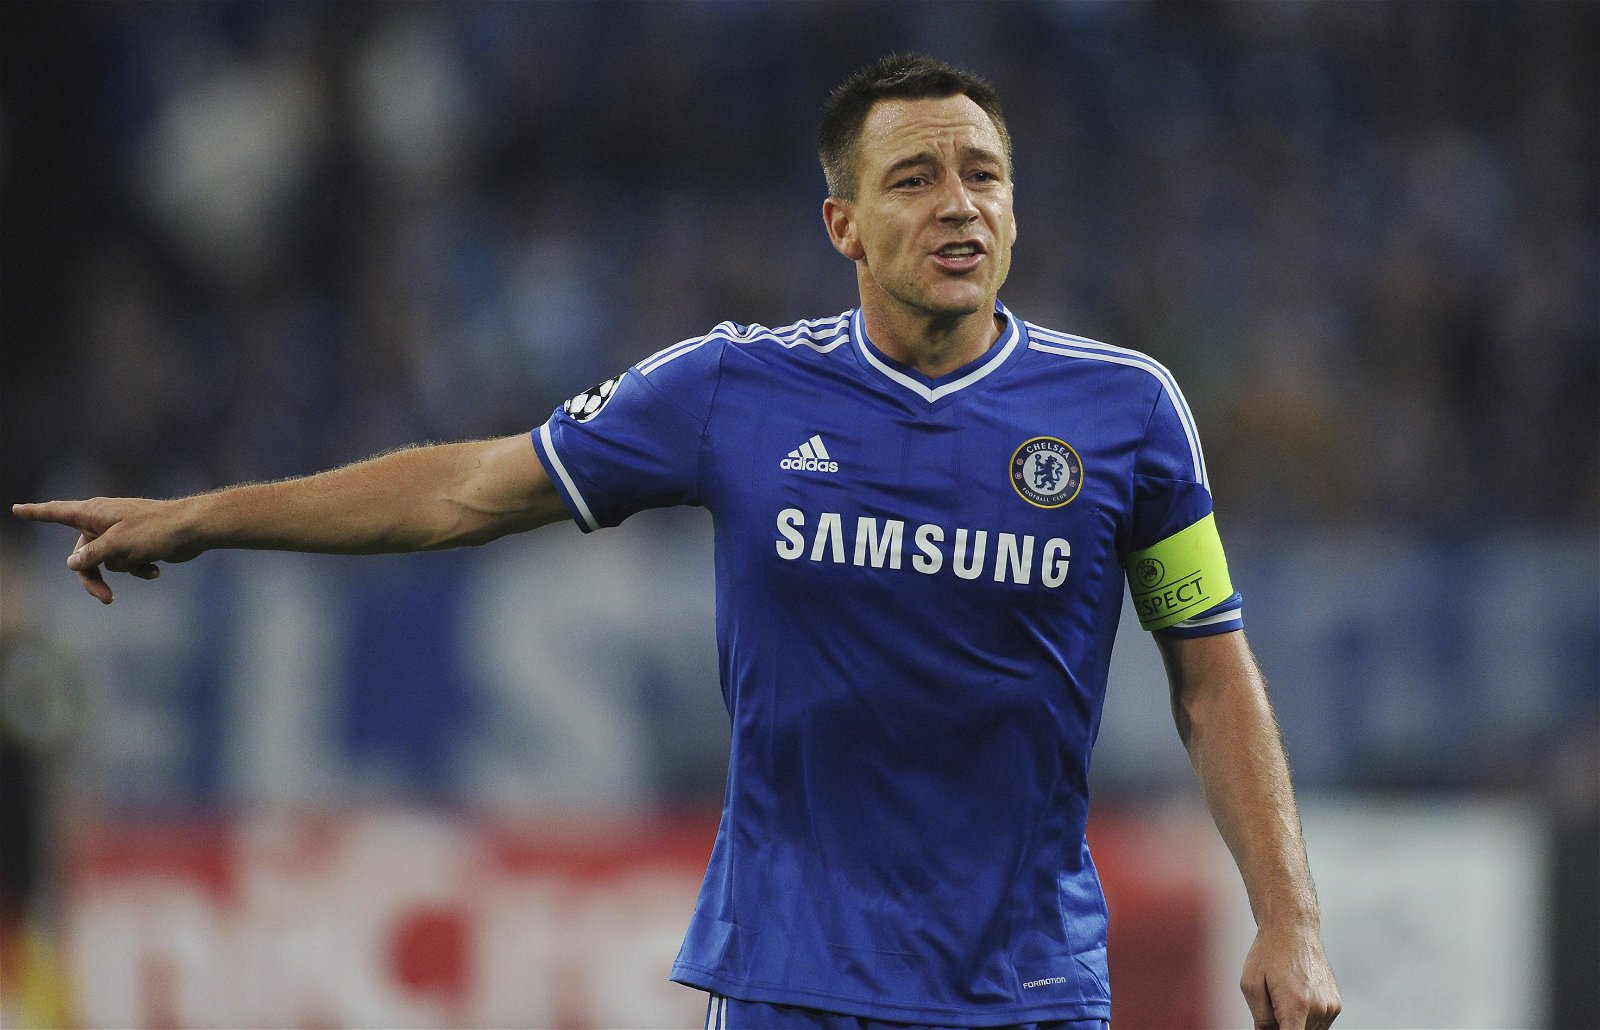 John Terry wants Hazard stay and why he kept jersey number 26